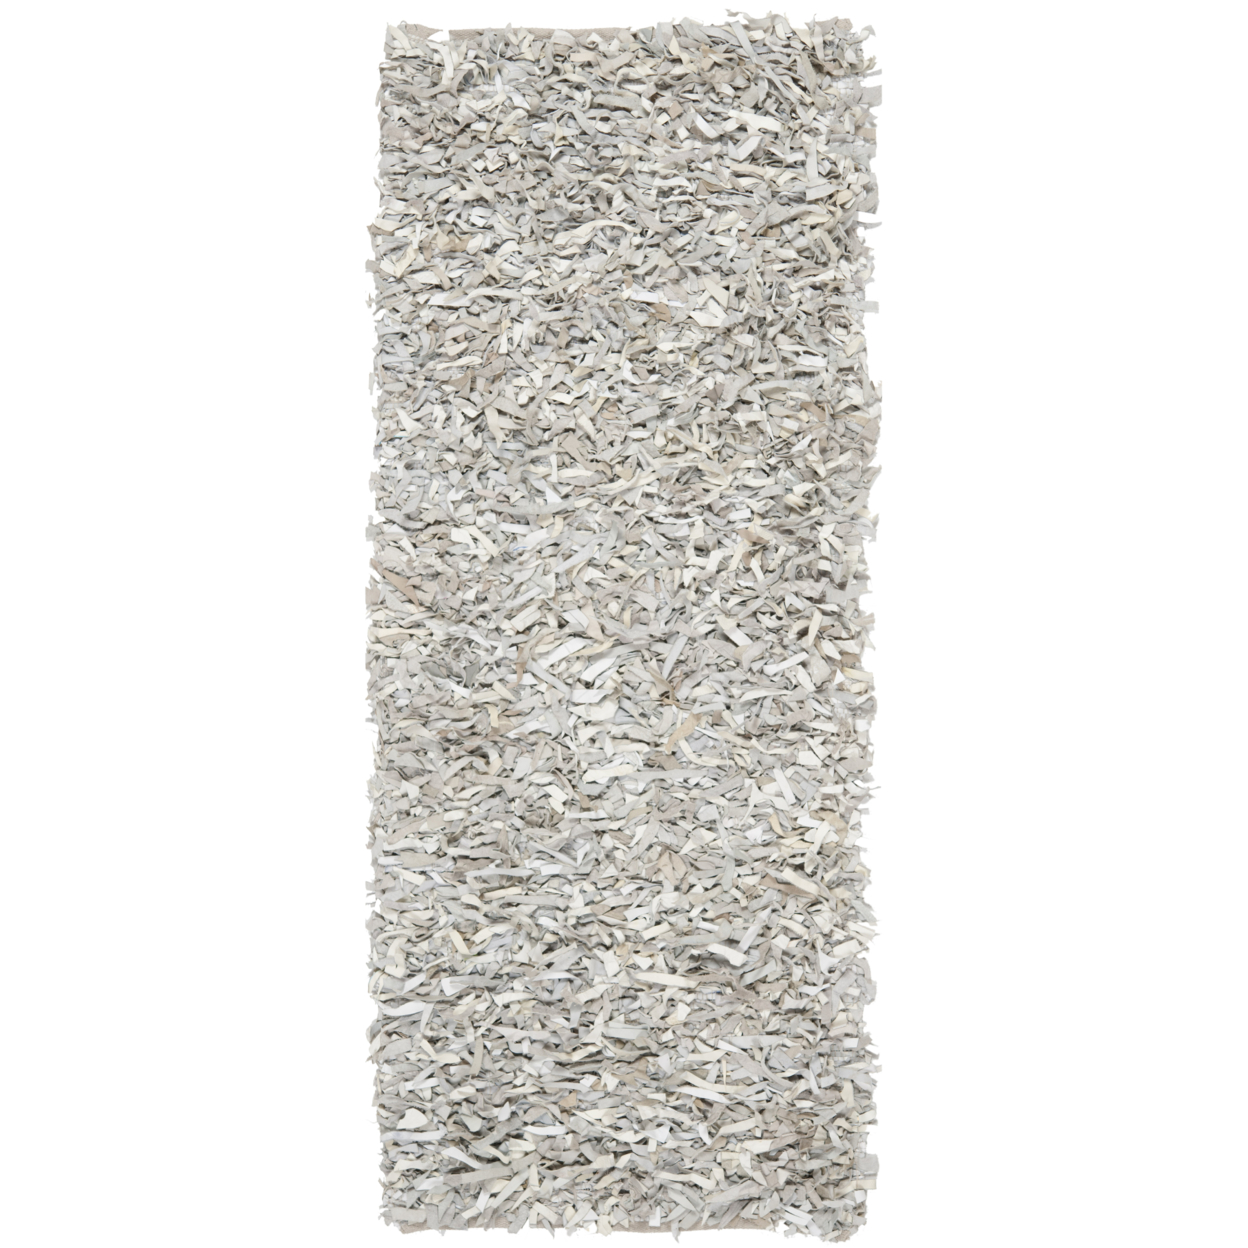 SAFAVIEH Leather Shag LSG511C Hand-knotted White Rug - 6' Square